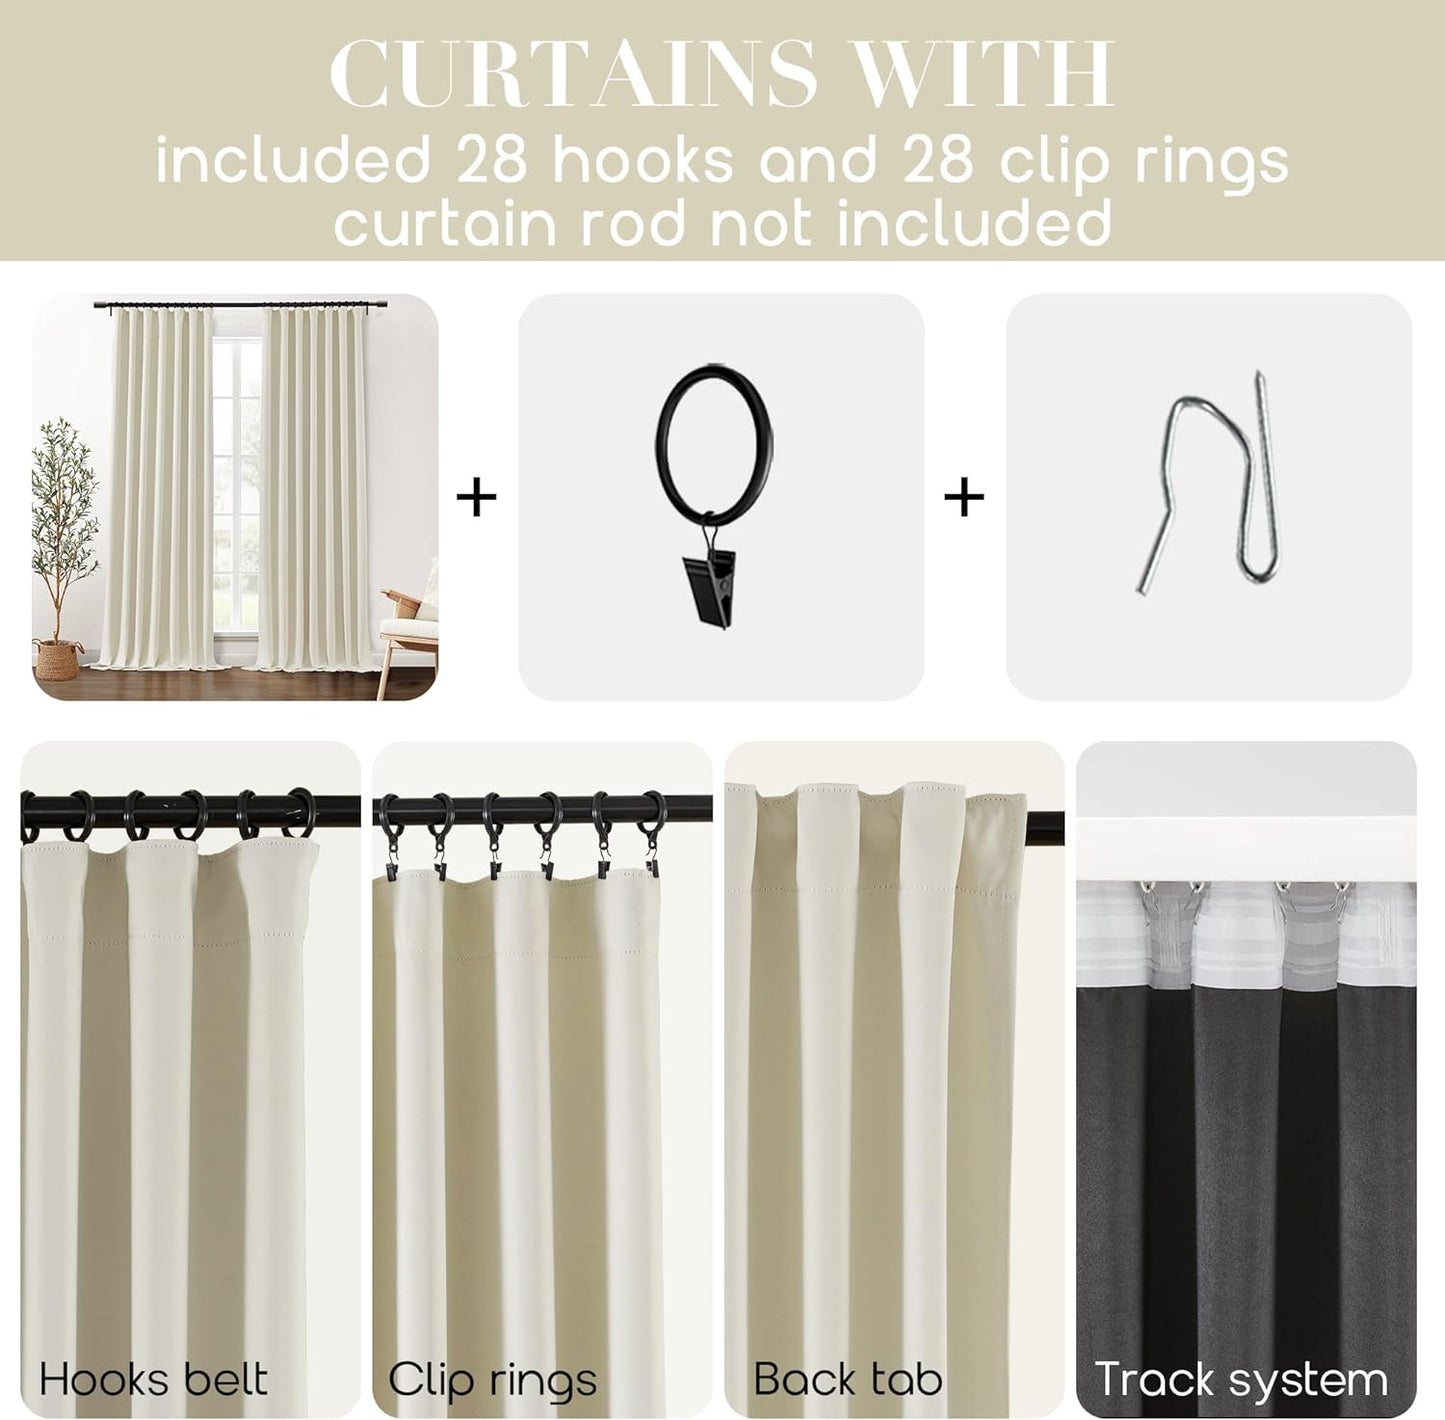 SHINELAND Beige Room Darkening Curtains 105 Inches Long for Living Room Bedroom,Cortinas Para Cuarto Bloqueador De Luz,Thermal Insulated Back Tab Pleat Blackout Curtains for Sunroom Patio Door Indoor  SHINELAND   